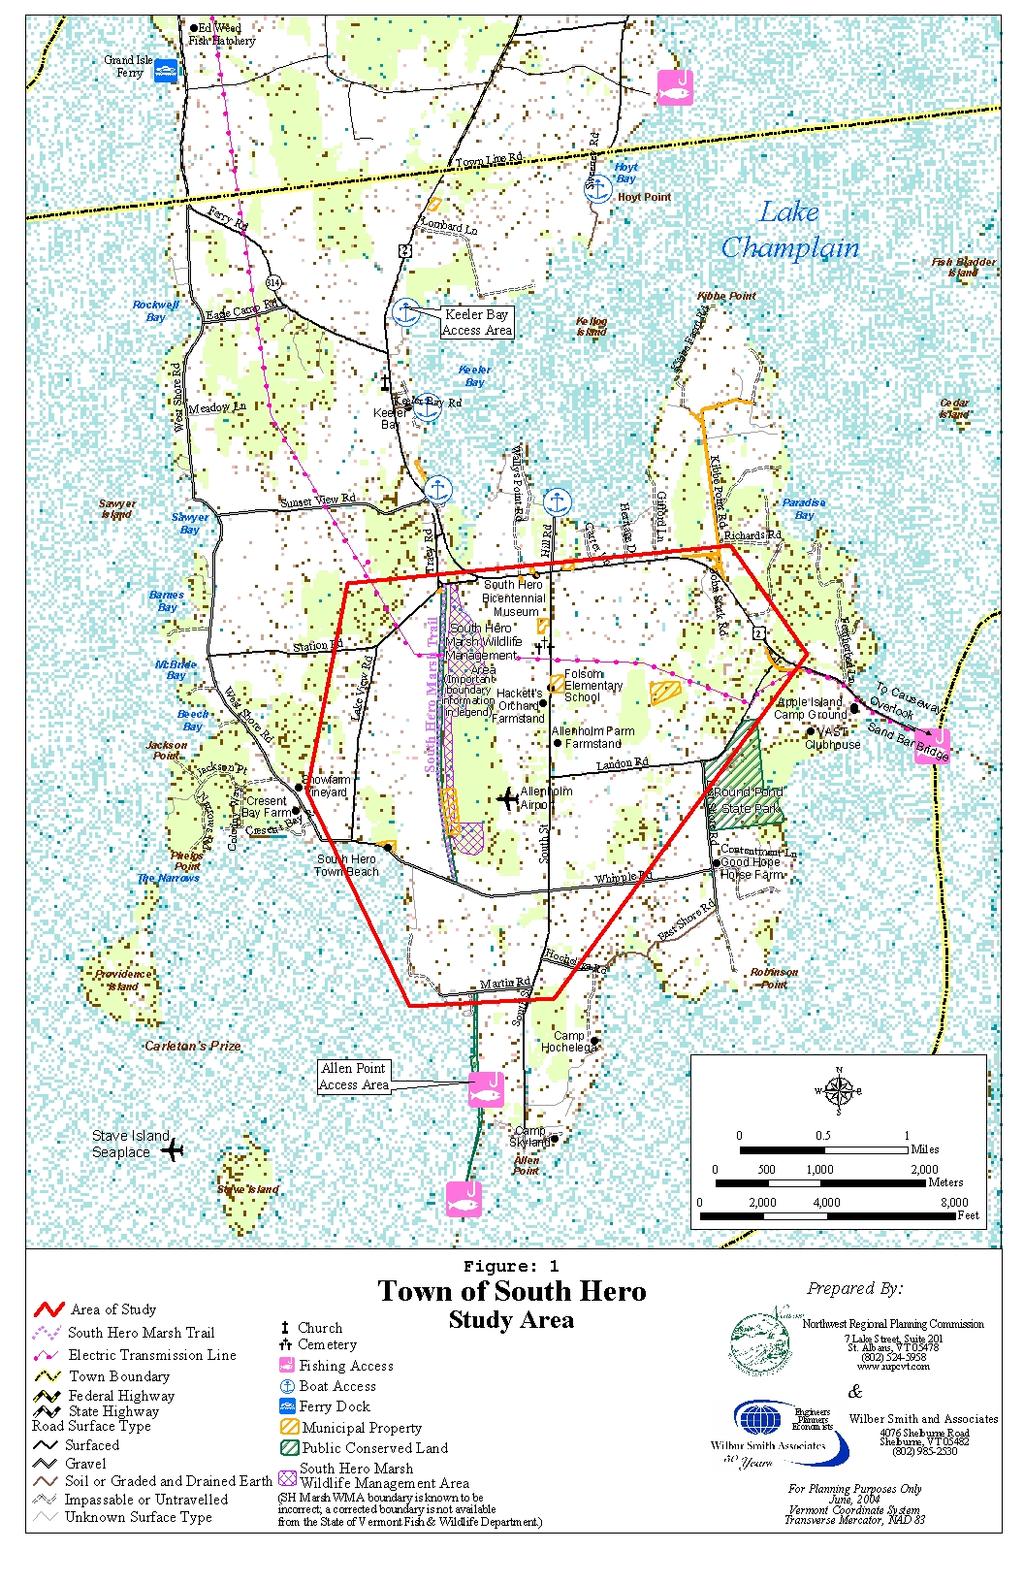 South Hero Village to Allen Point Access Linkage Feasibility and Alignment